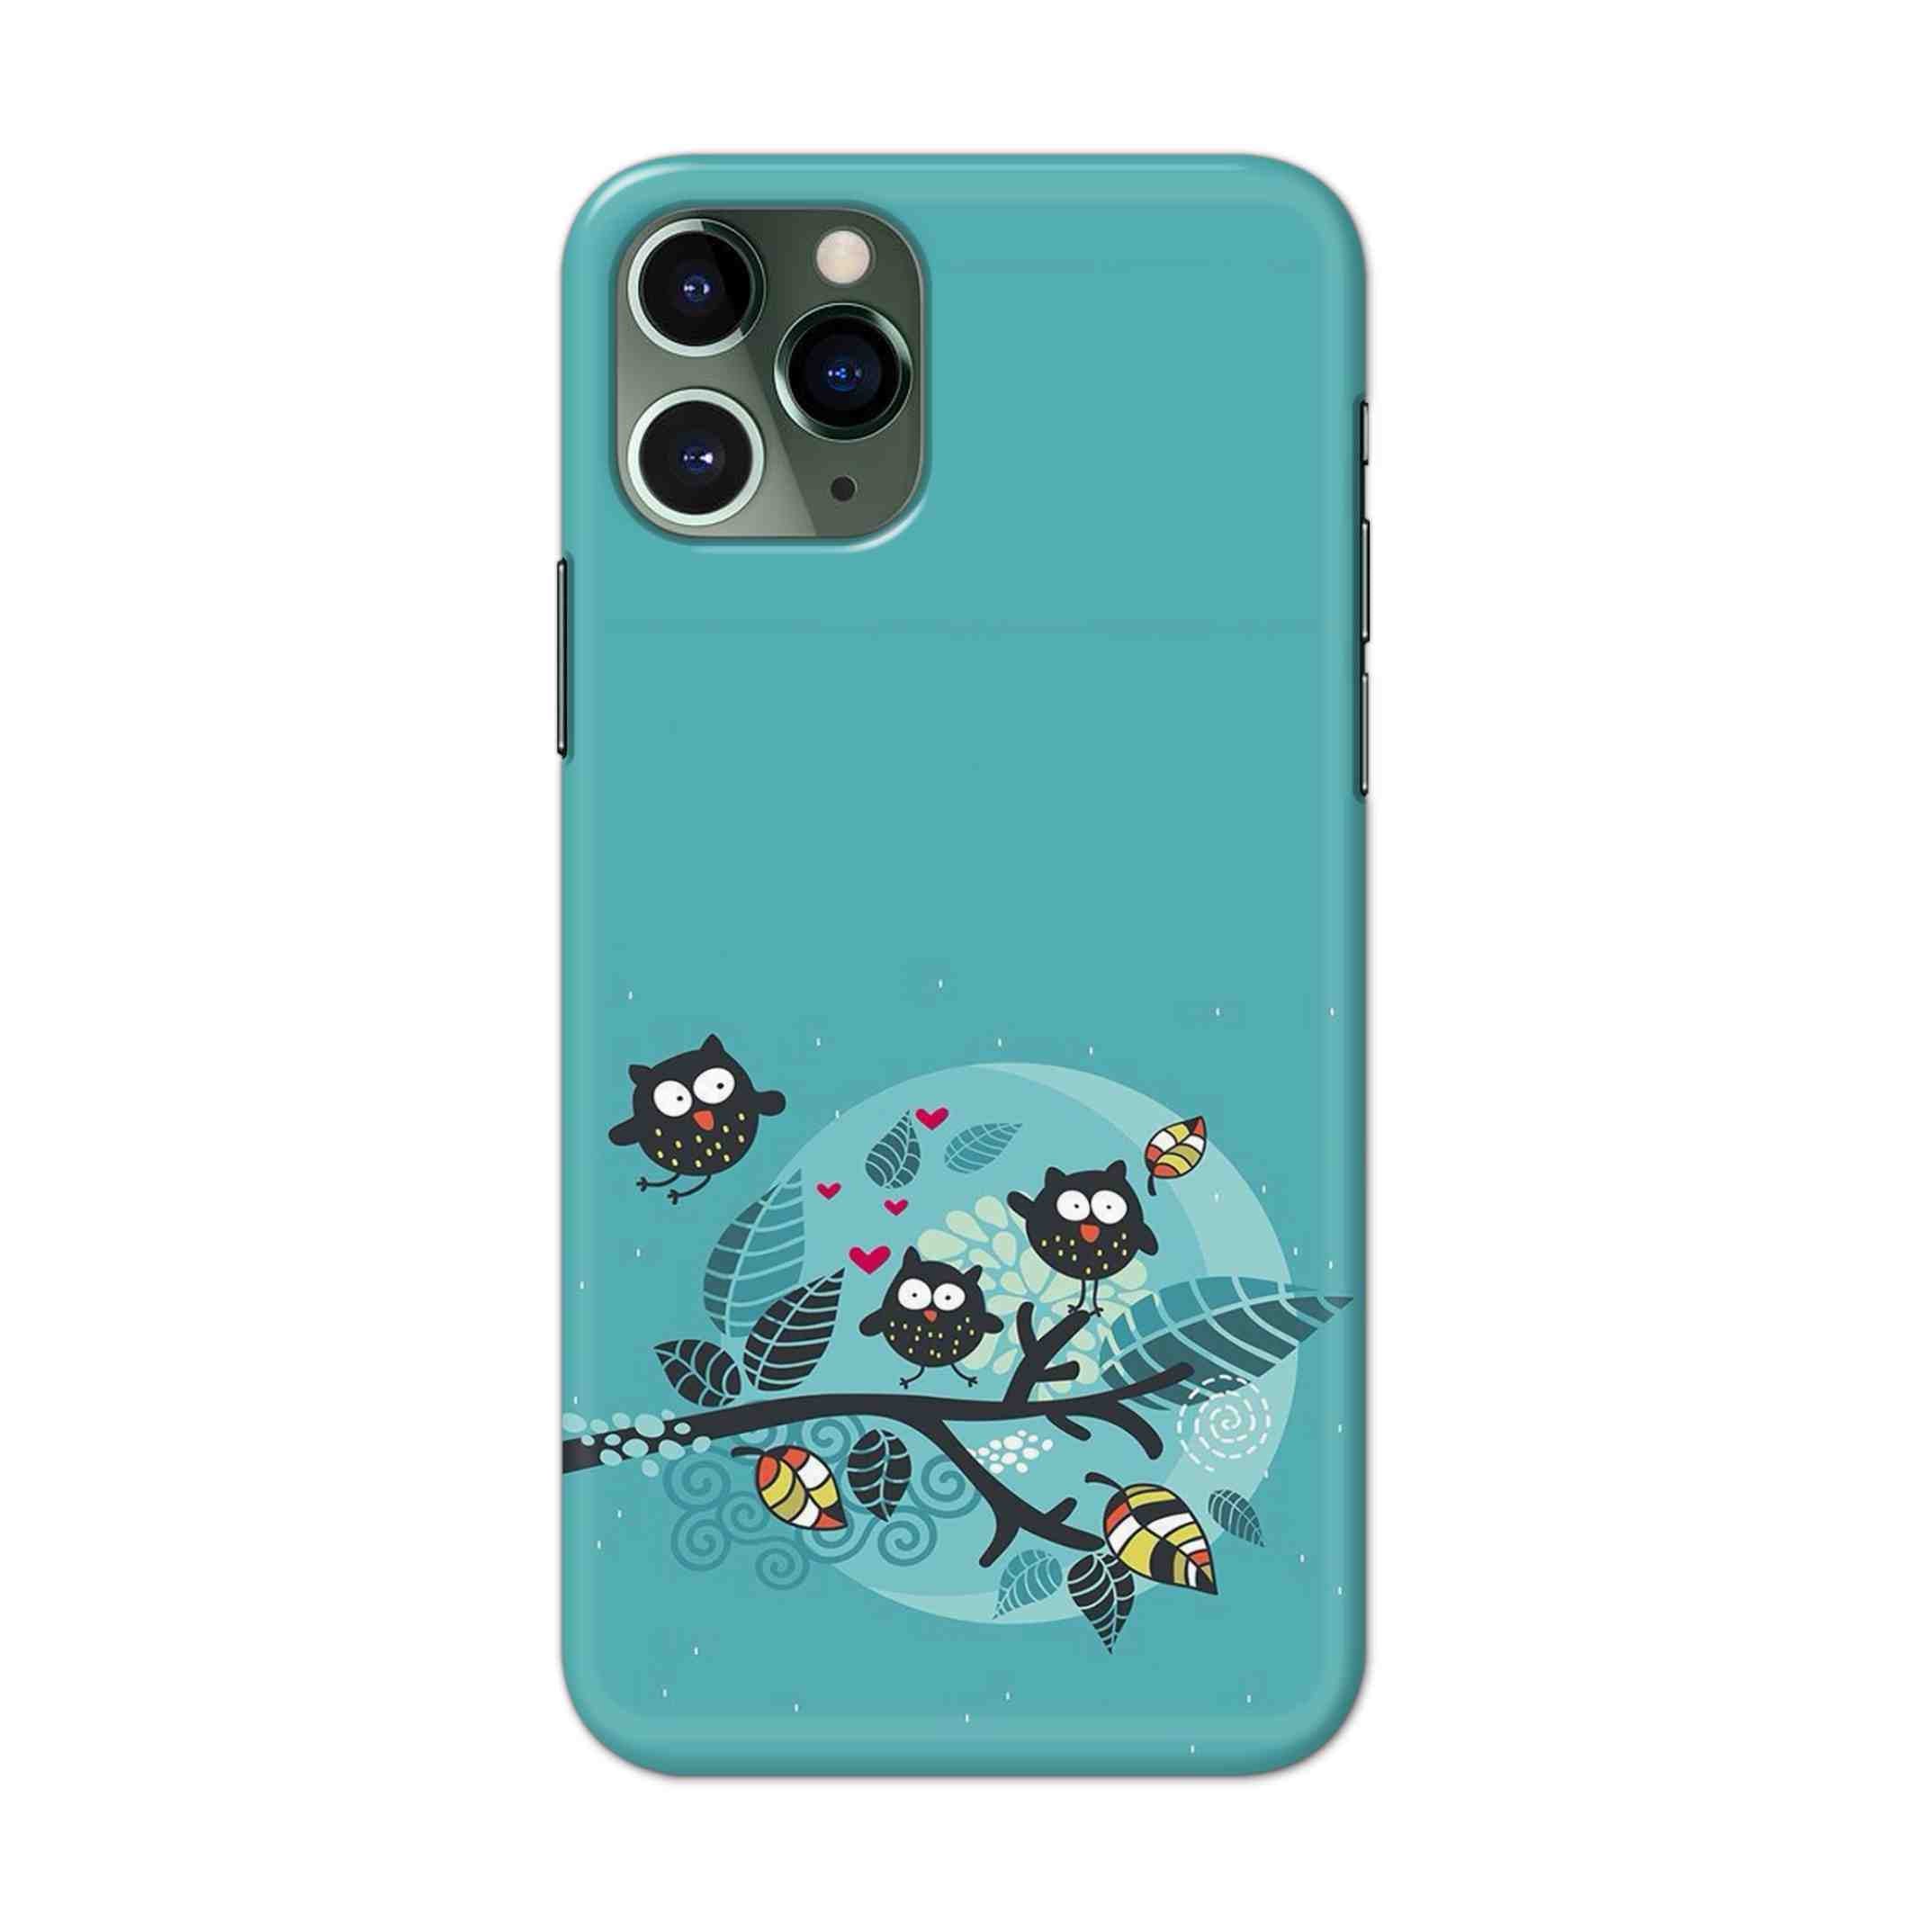 Buy Owl Hard Back Mobile Phone Case/Cover For iPhone 11 Pro Online